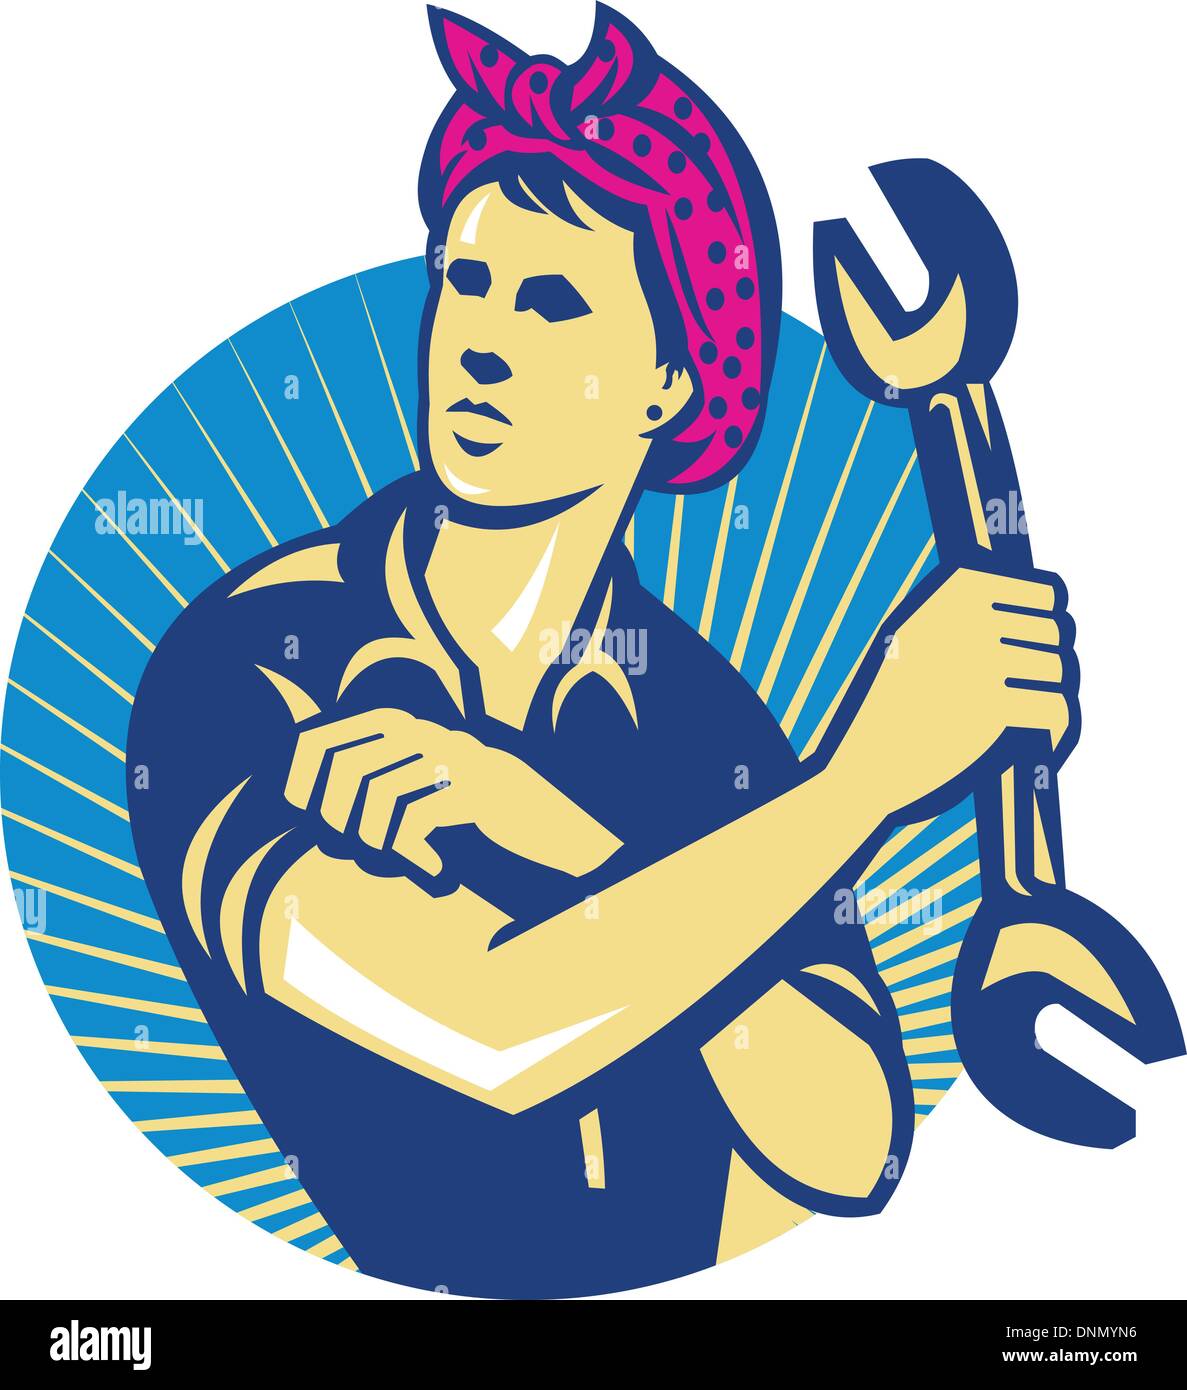 Illustration of a female mechanic holding a spanner wrench flexing her muscle arm set inside circle done in retro style. Stock Vector